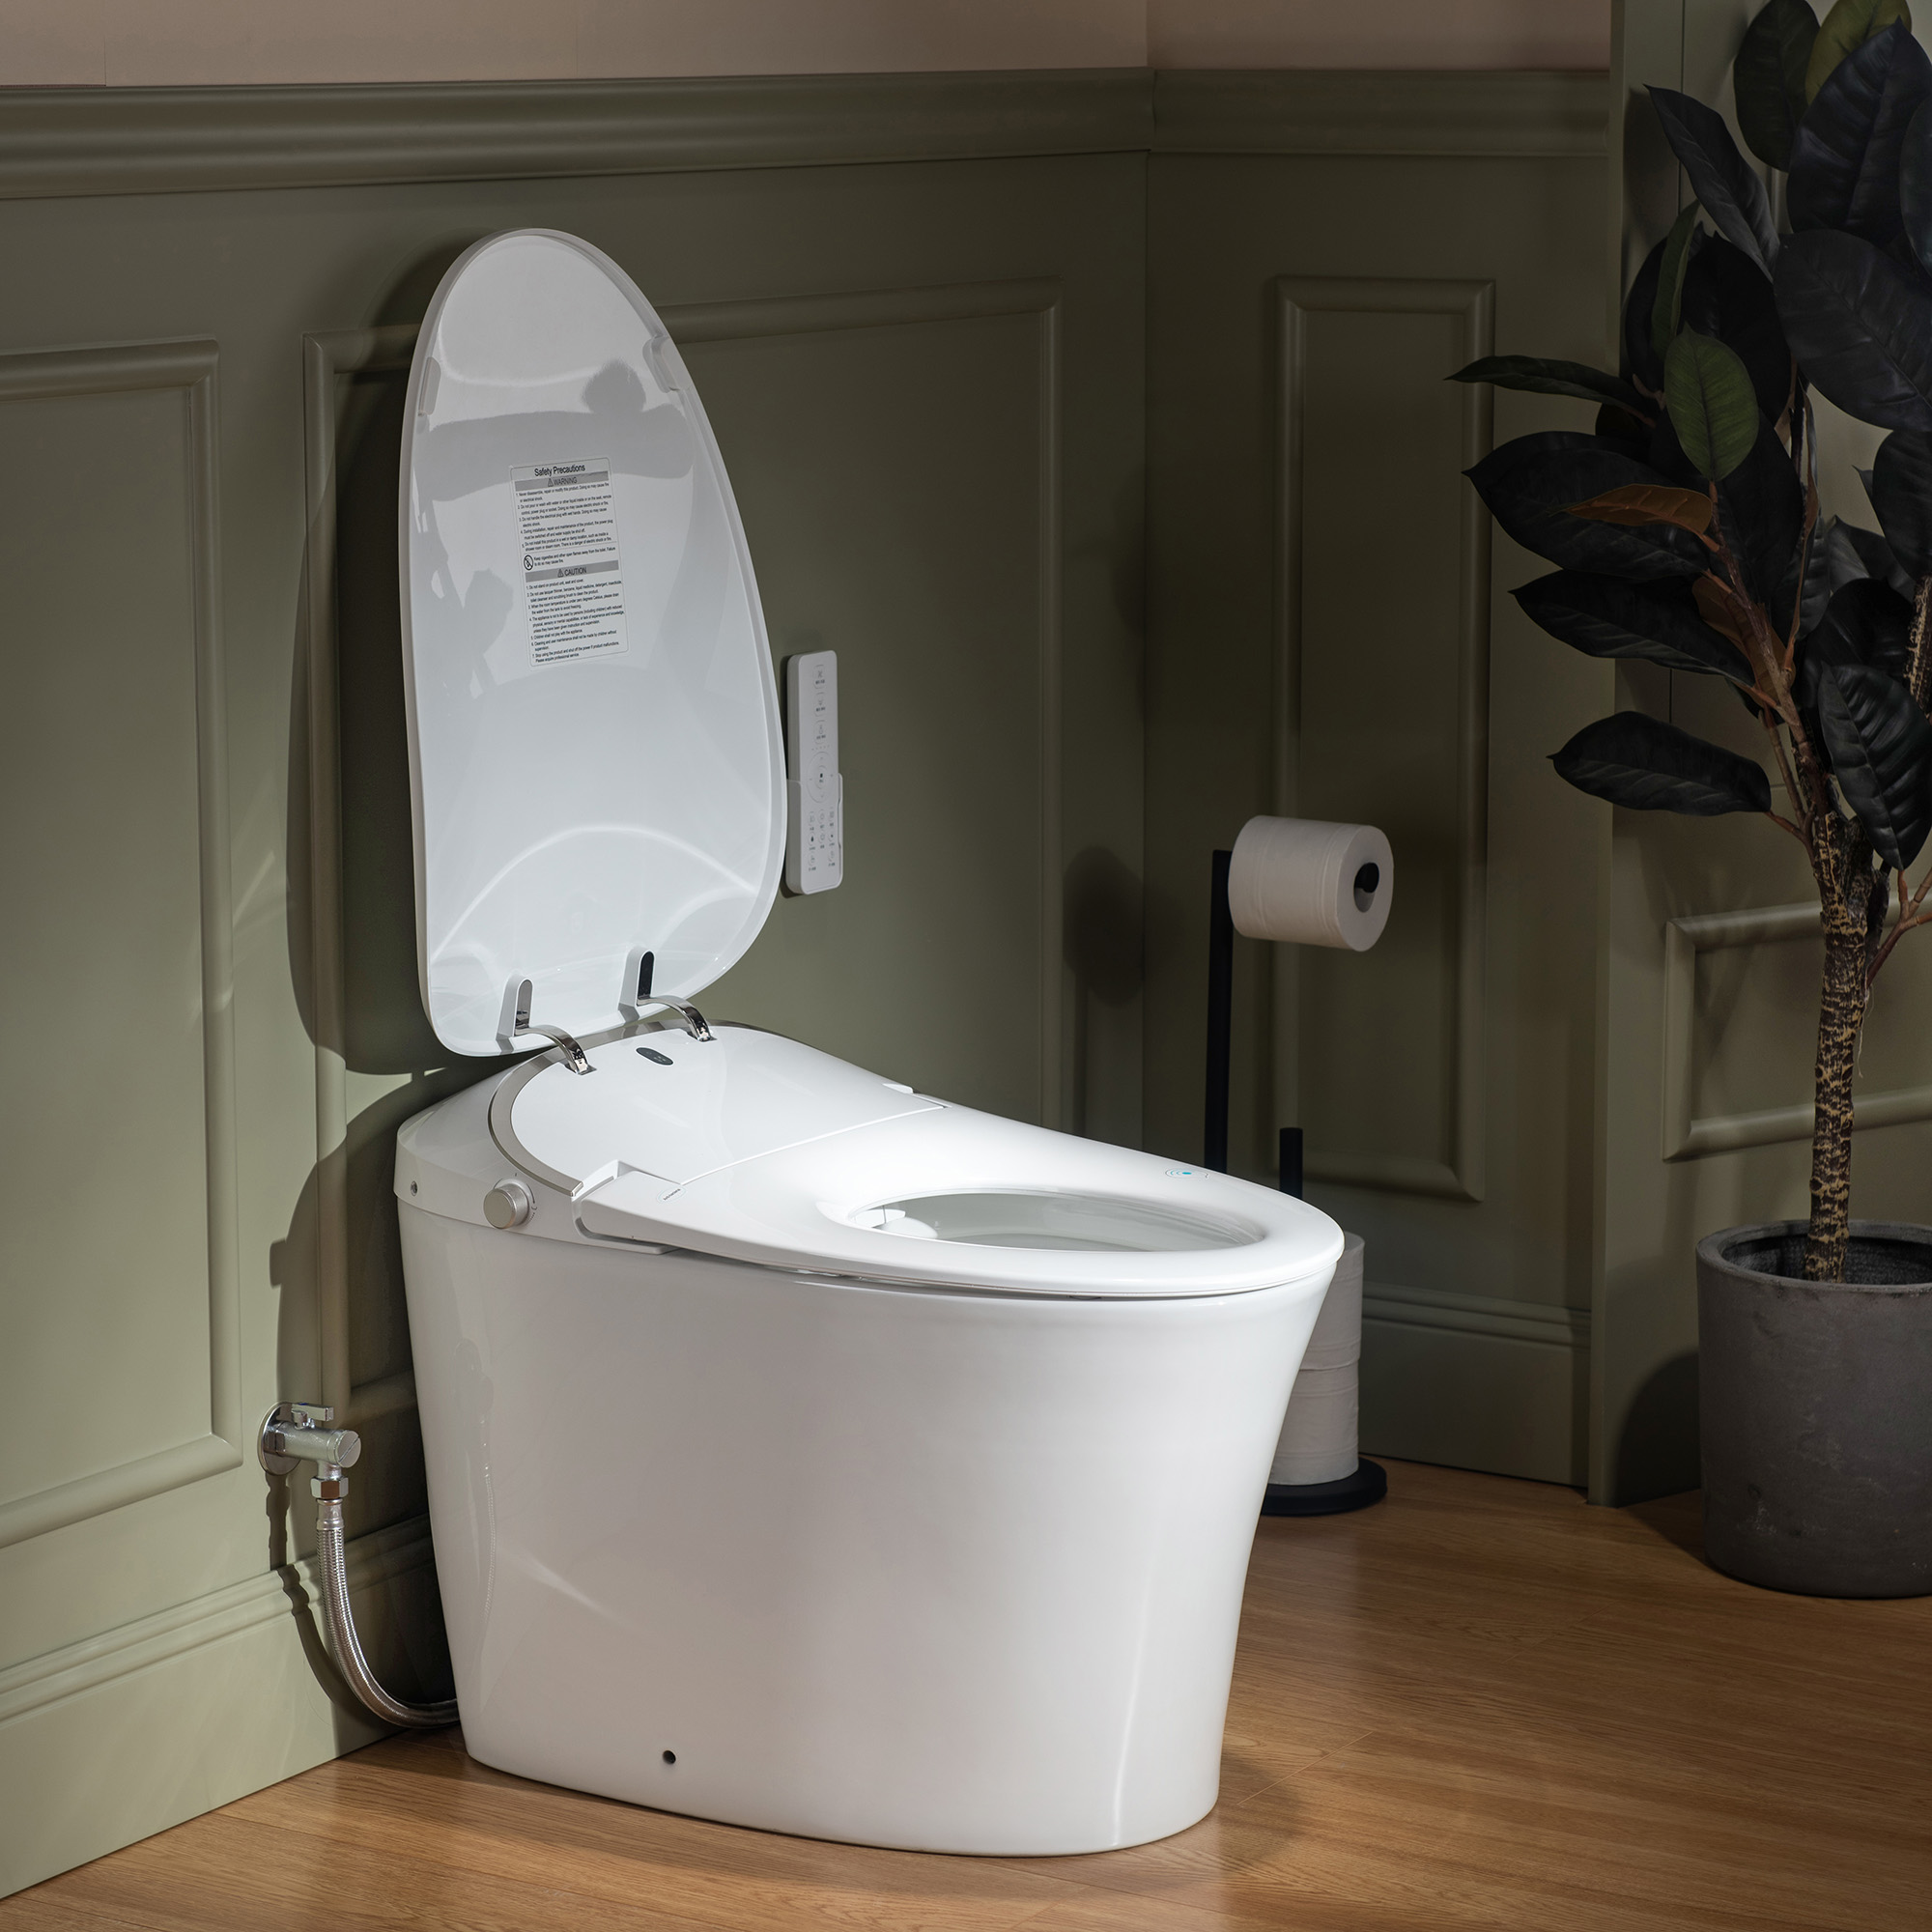  WOODBRIDGE LT610 One Piece Elongated Smart Toilet Bidet with Massage Washing, Auto Open and Close Seat and Lid, Auto Flush, Heated Seat and Integrated Multi Function Remote Control, White_11628